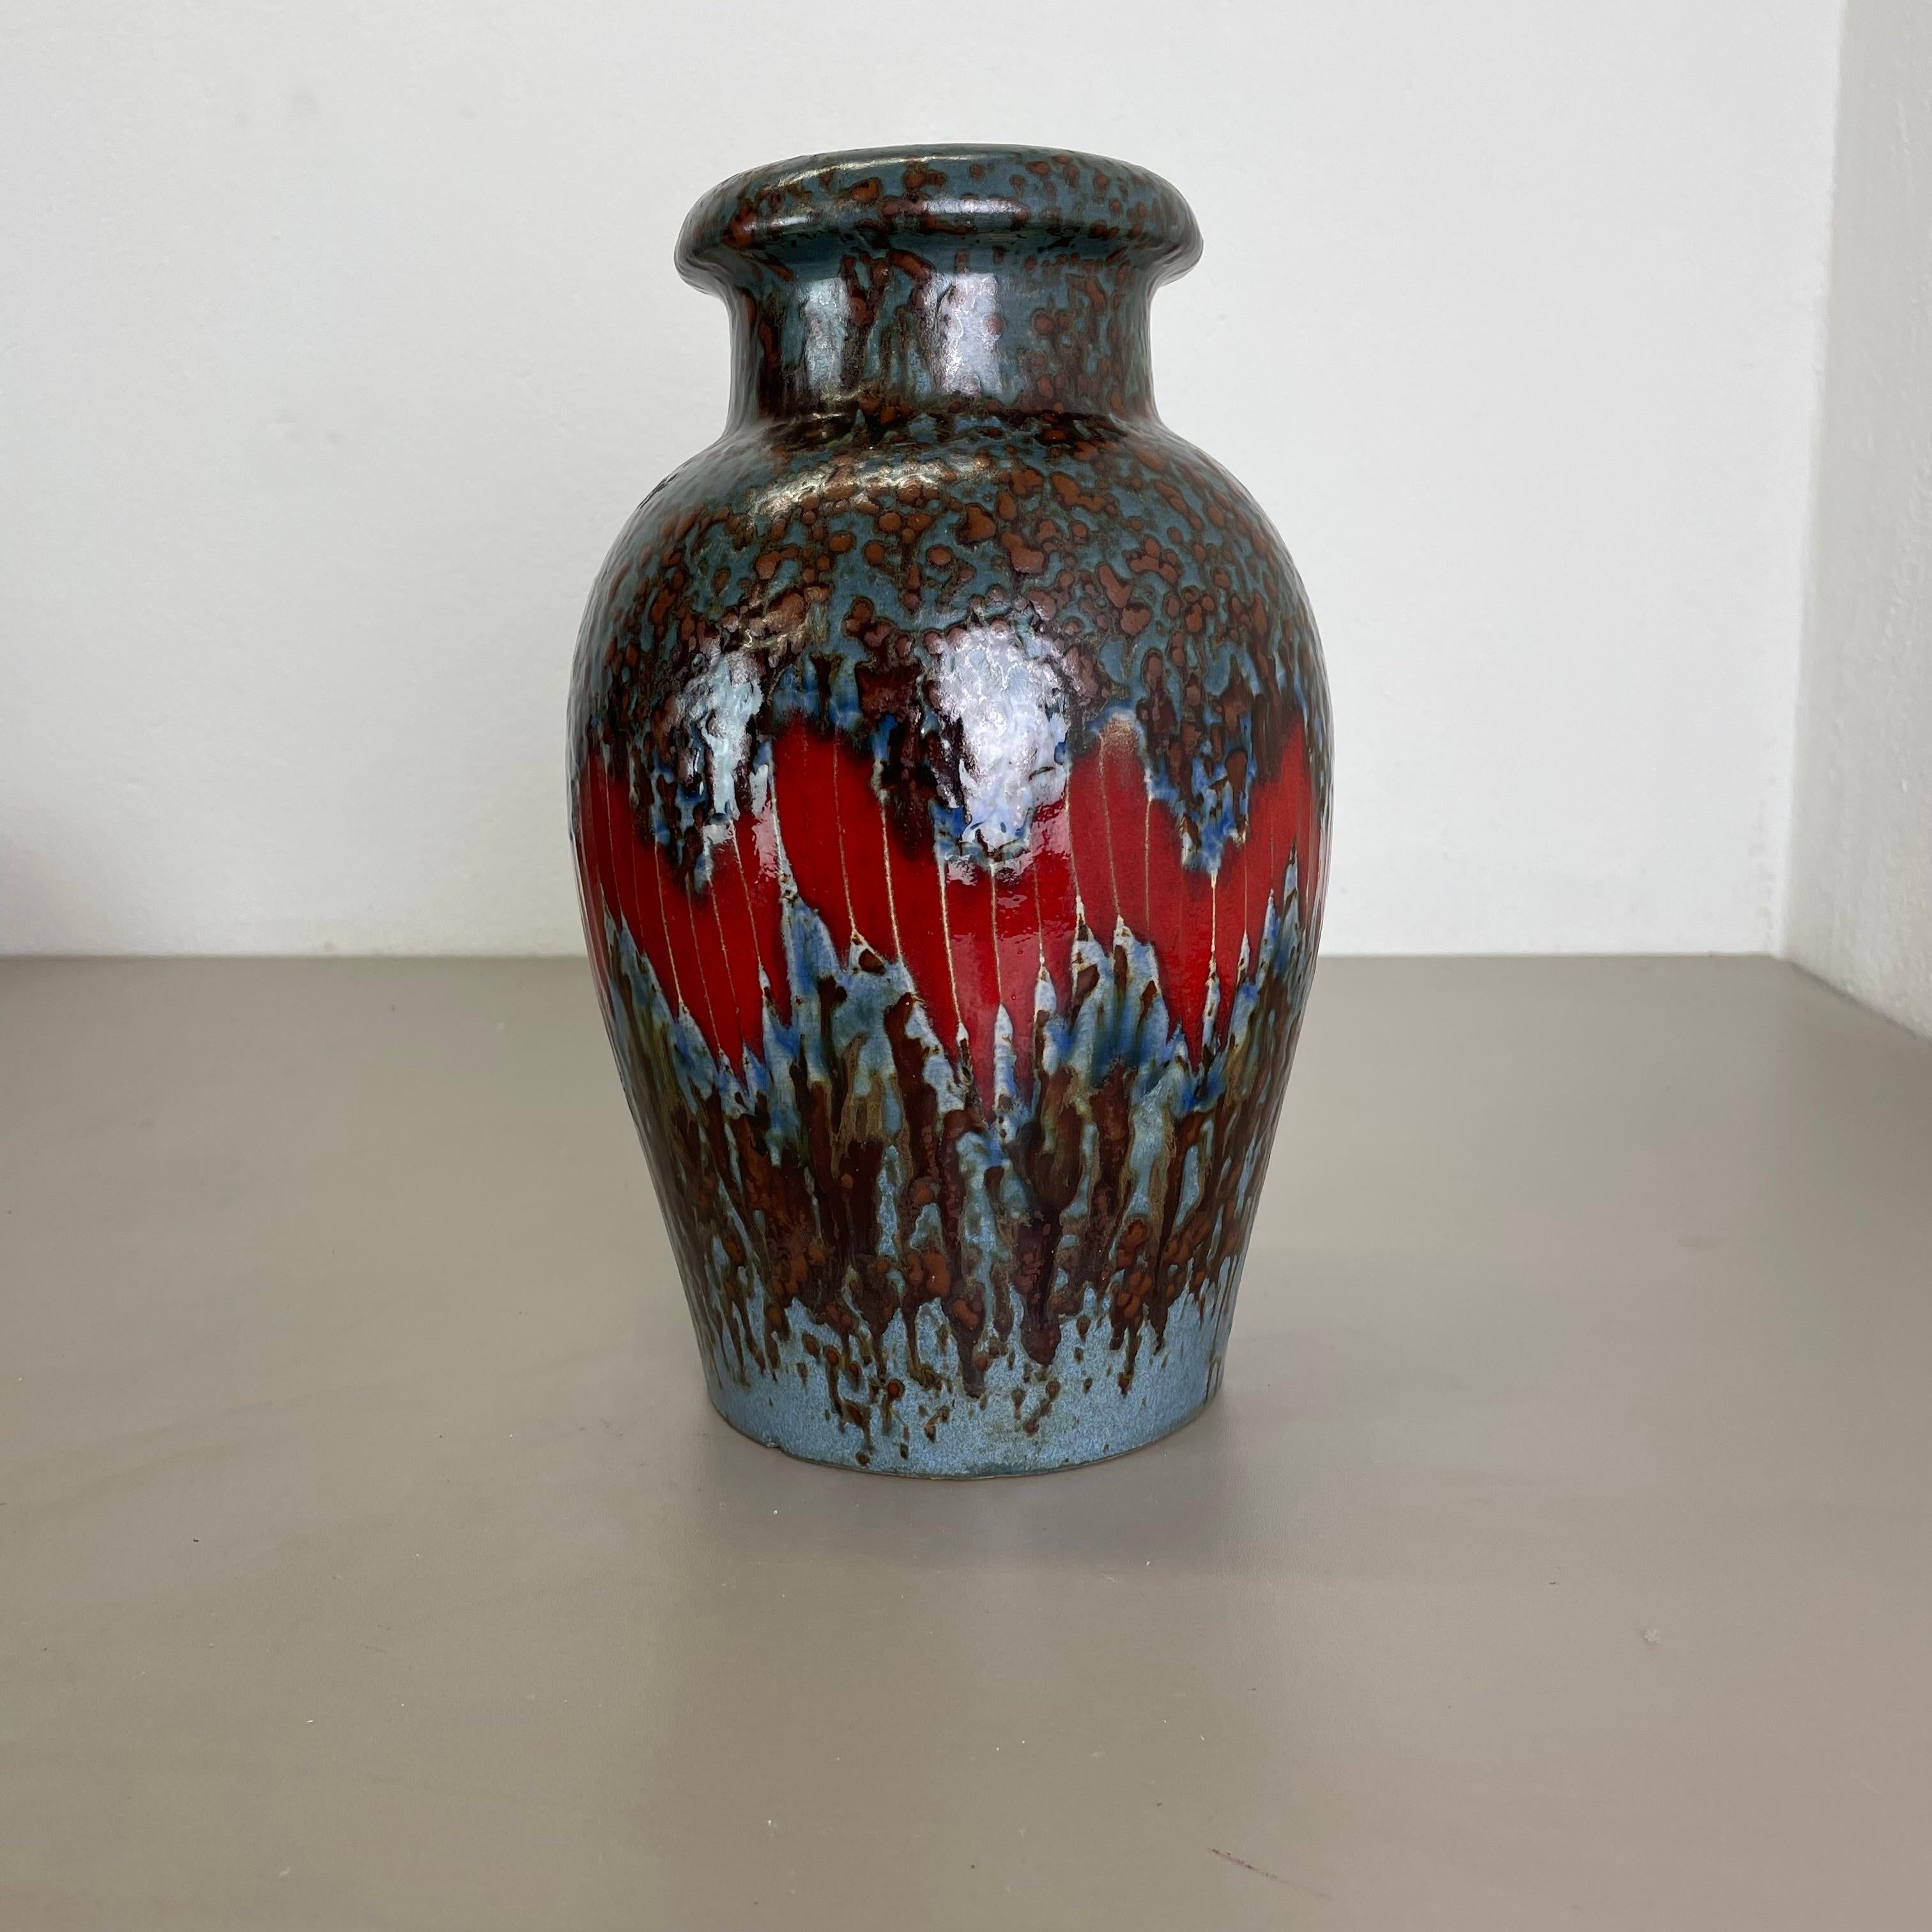 Article:

Fat lava art vase super rare LORA DECOR.



Producer:

Scheurich, Germany



Decade:

1970s




This original vintage vase was produced in the 1970s in Germany by Scheurich. It is made of ceramic pottery in fat lava optic. Super rare in